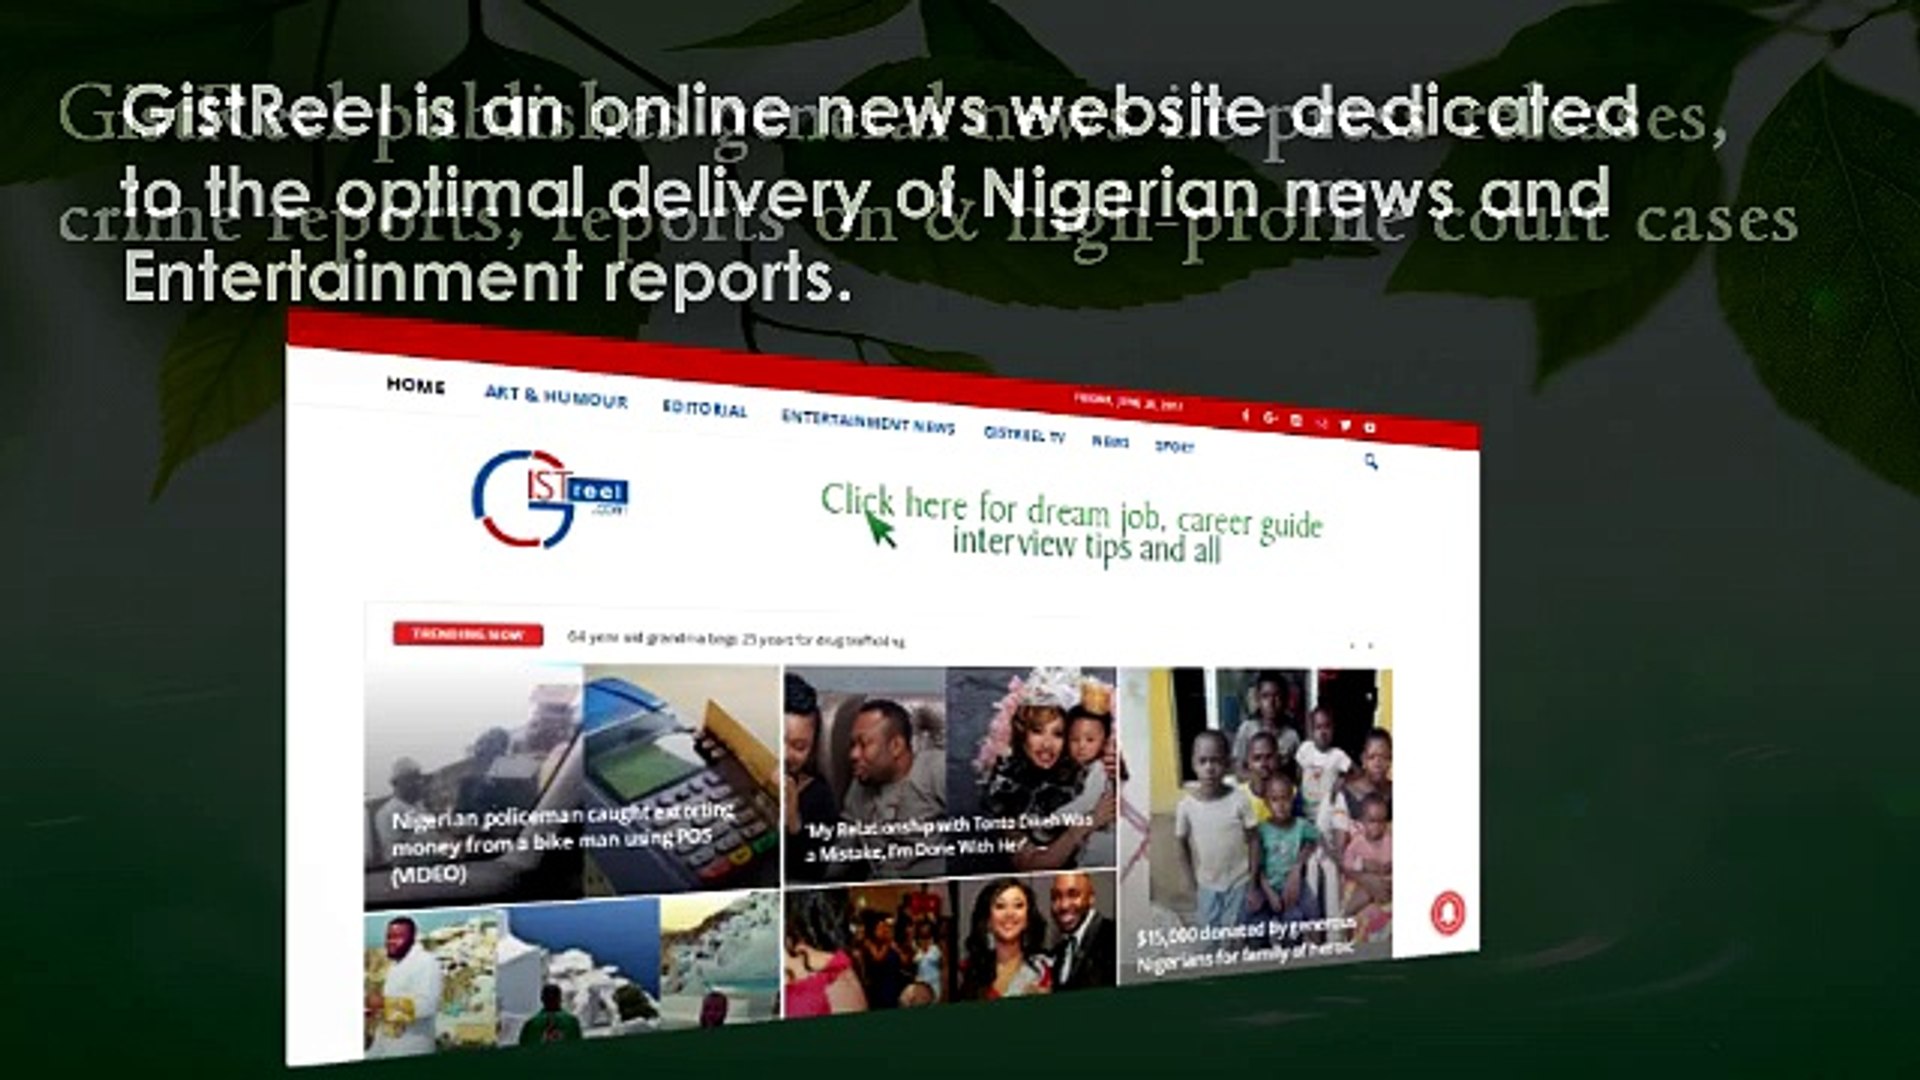 The Latest News In Nigeria Today - Gistreel.com